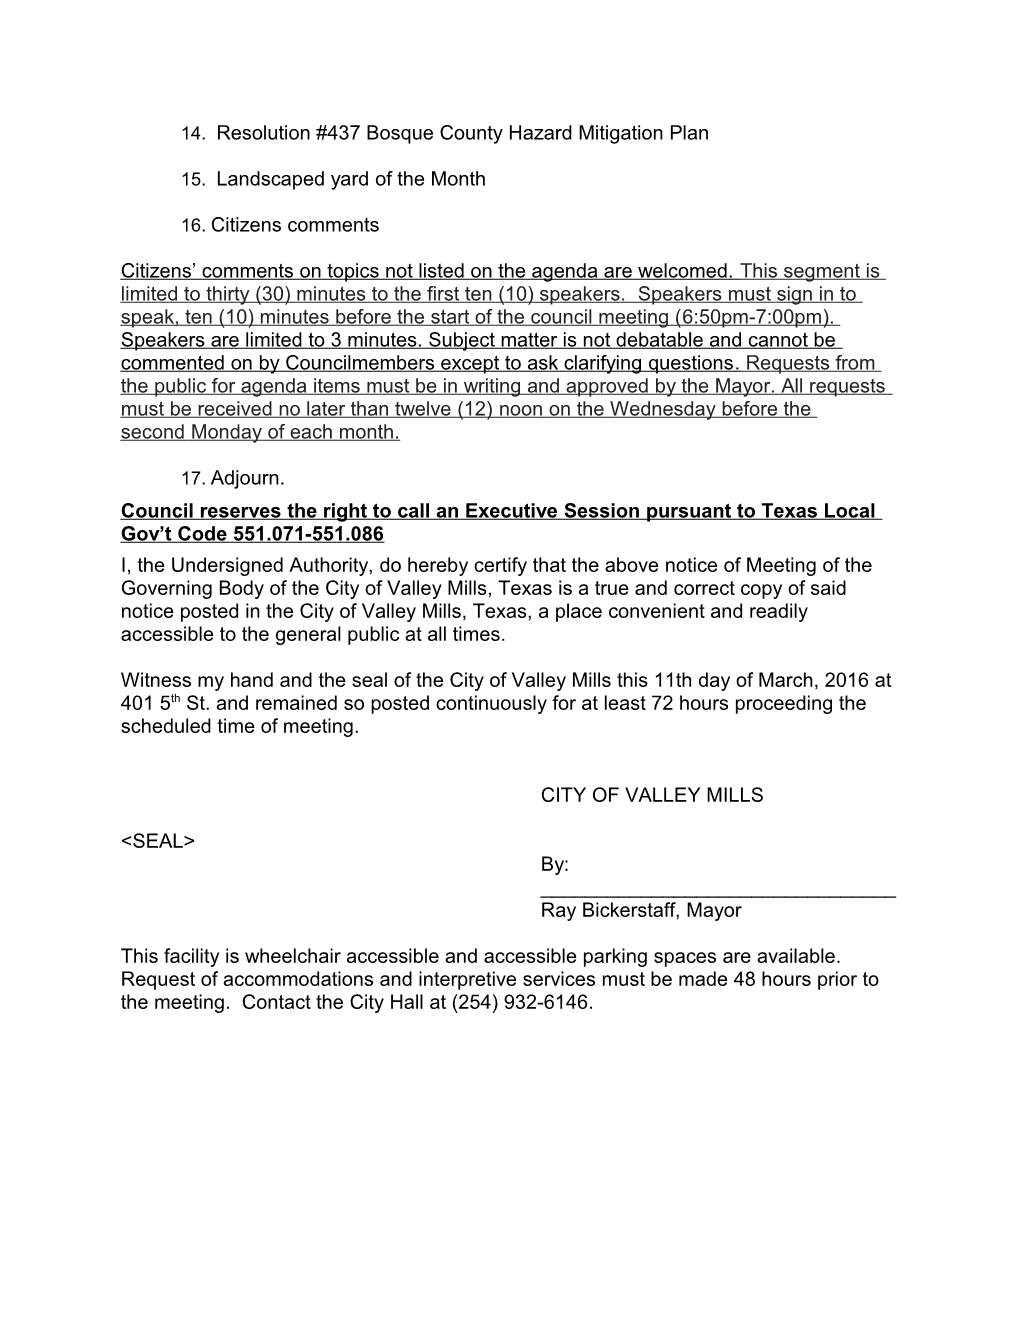 Notice of Meeting of the Governing Body